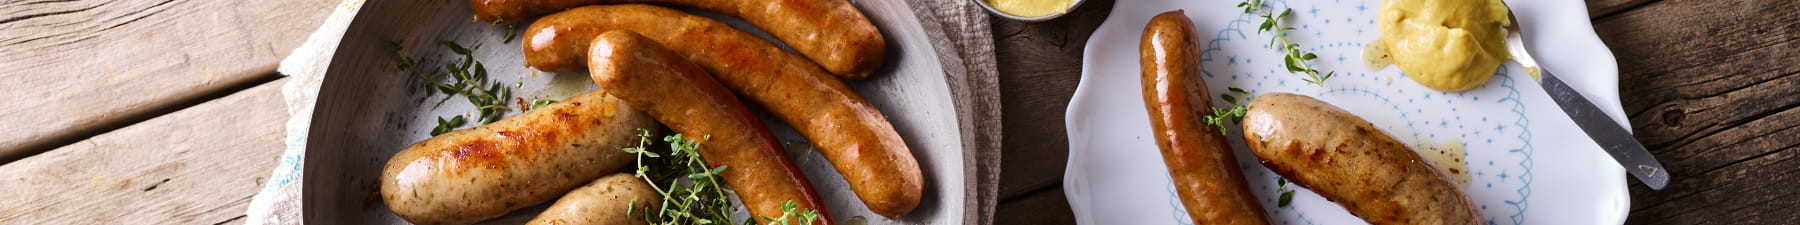 Emulsified sausages